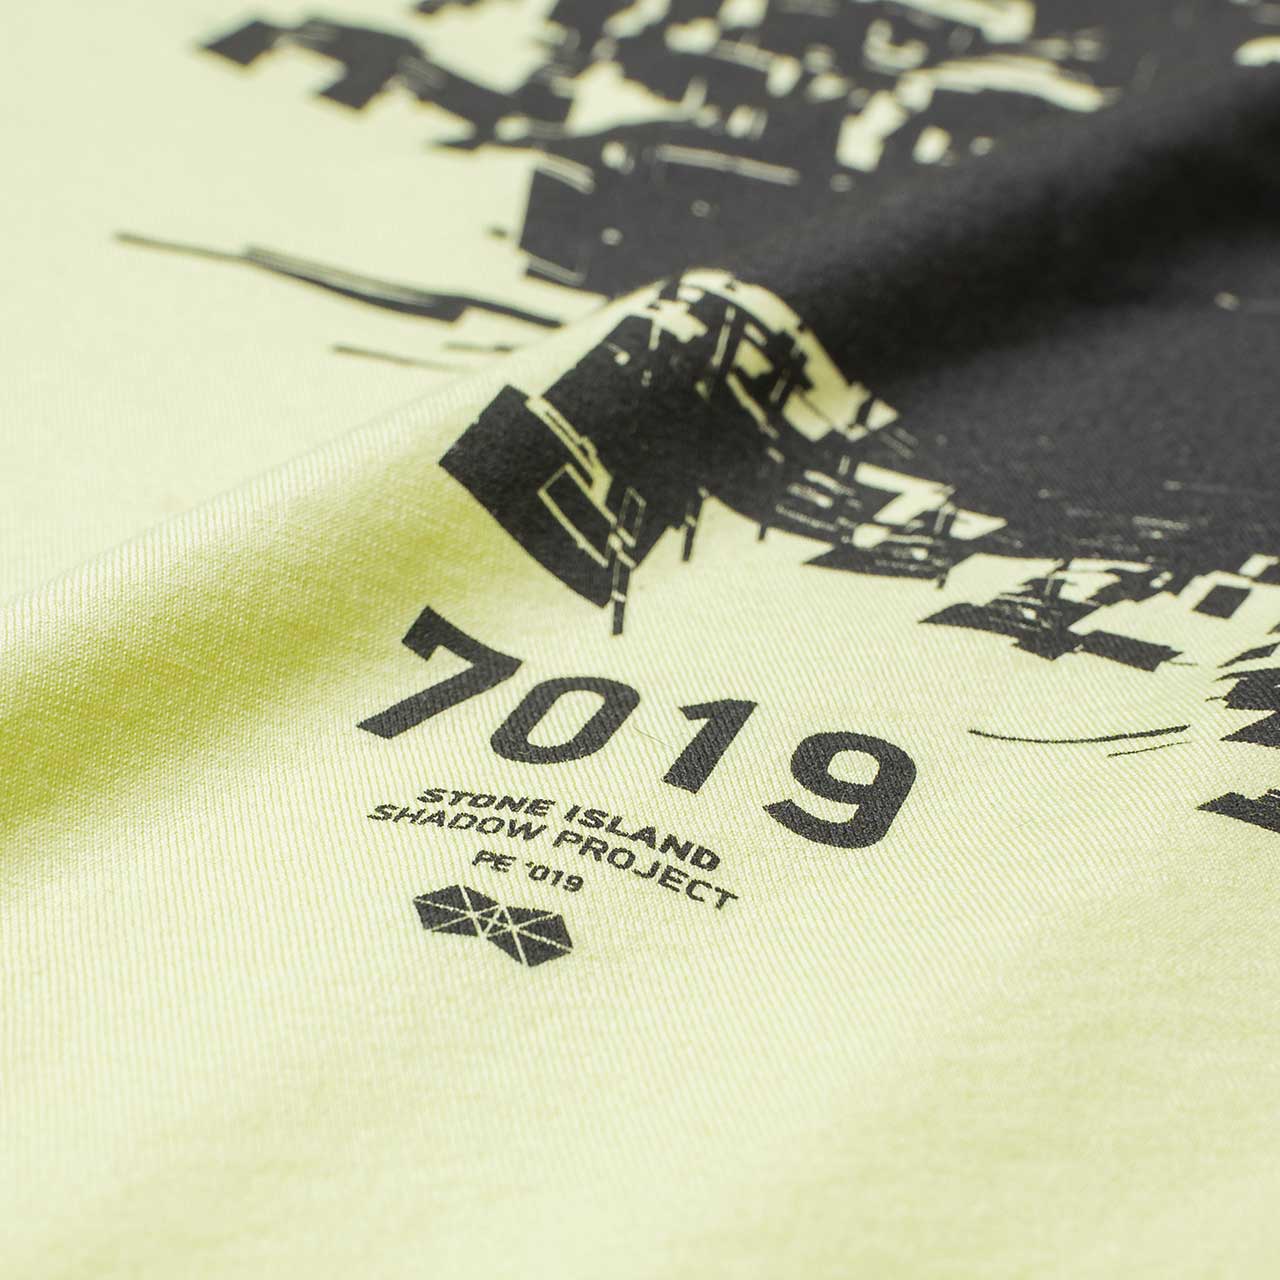 stone island shadow project t-shirt (yellow) - 701920510.v0051 - a.plus - Image - 3